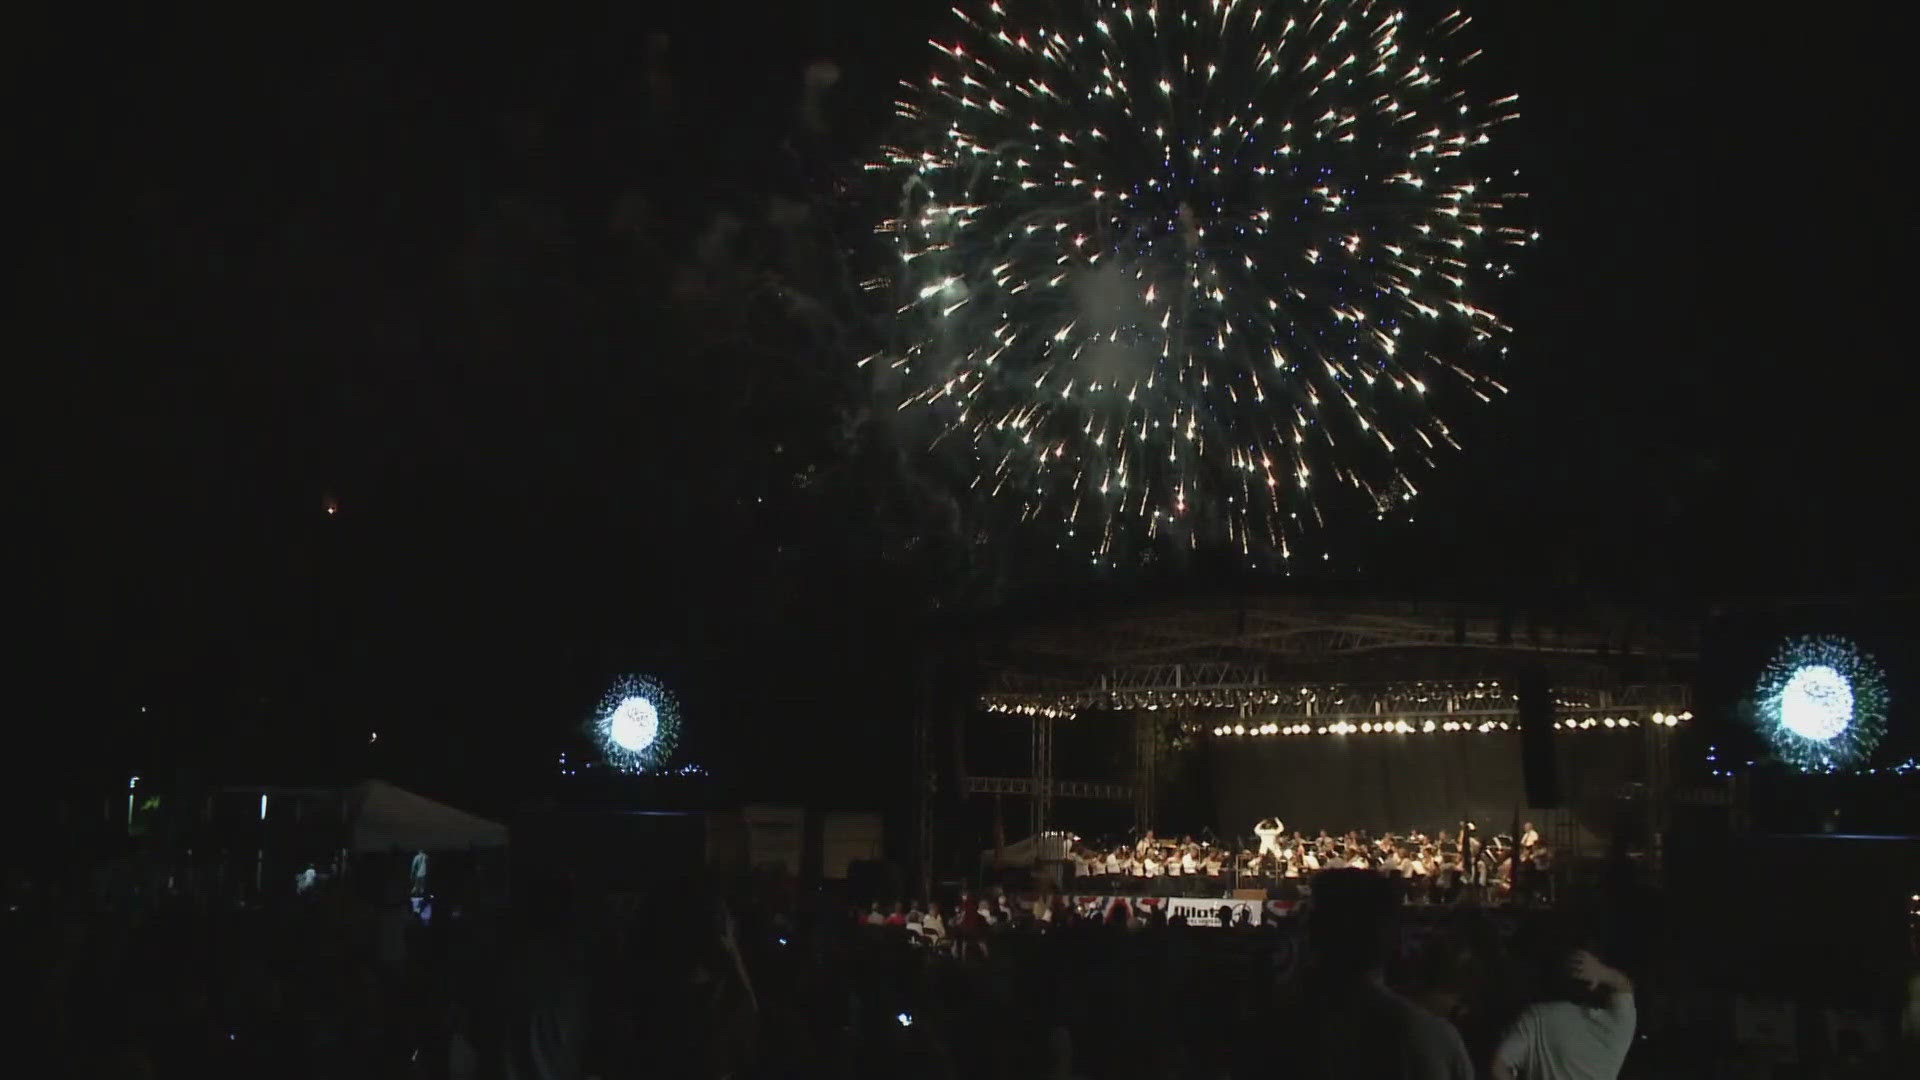 The city's Festival on the 4th starts at 5 p.m. and ends at 10 p.m. with a fireworks display.